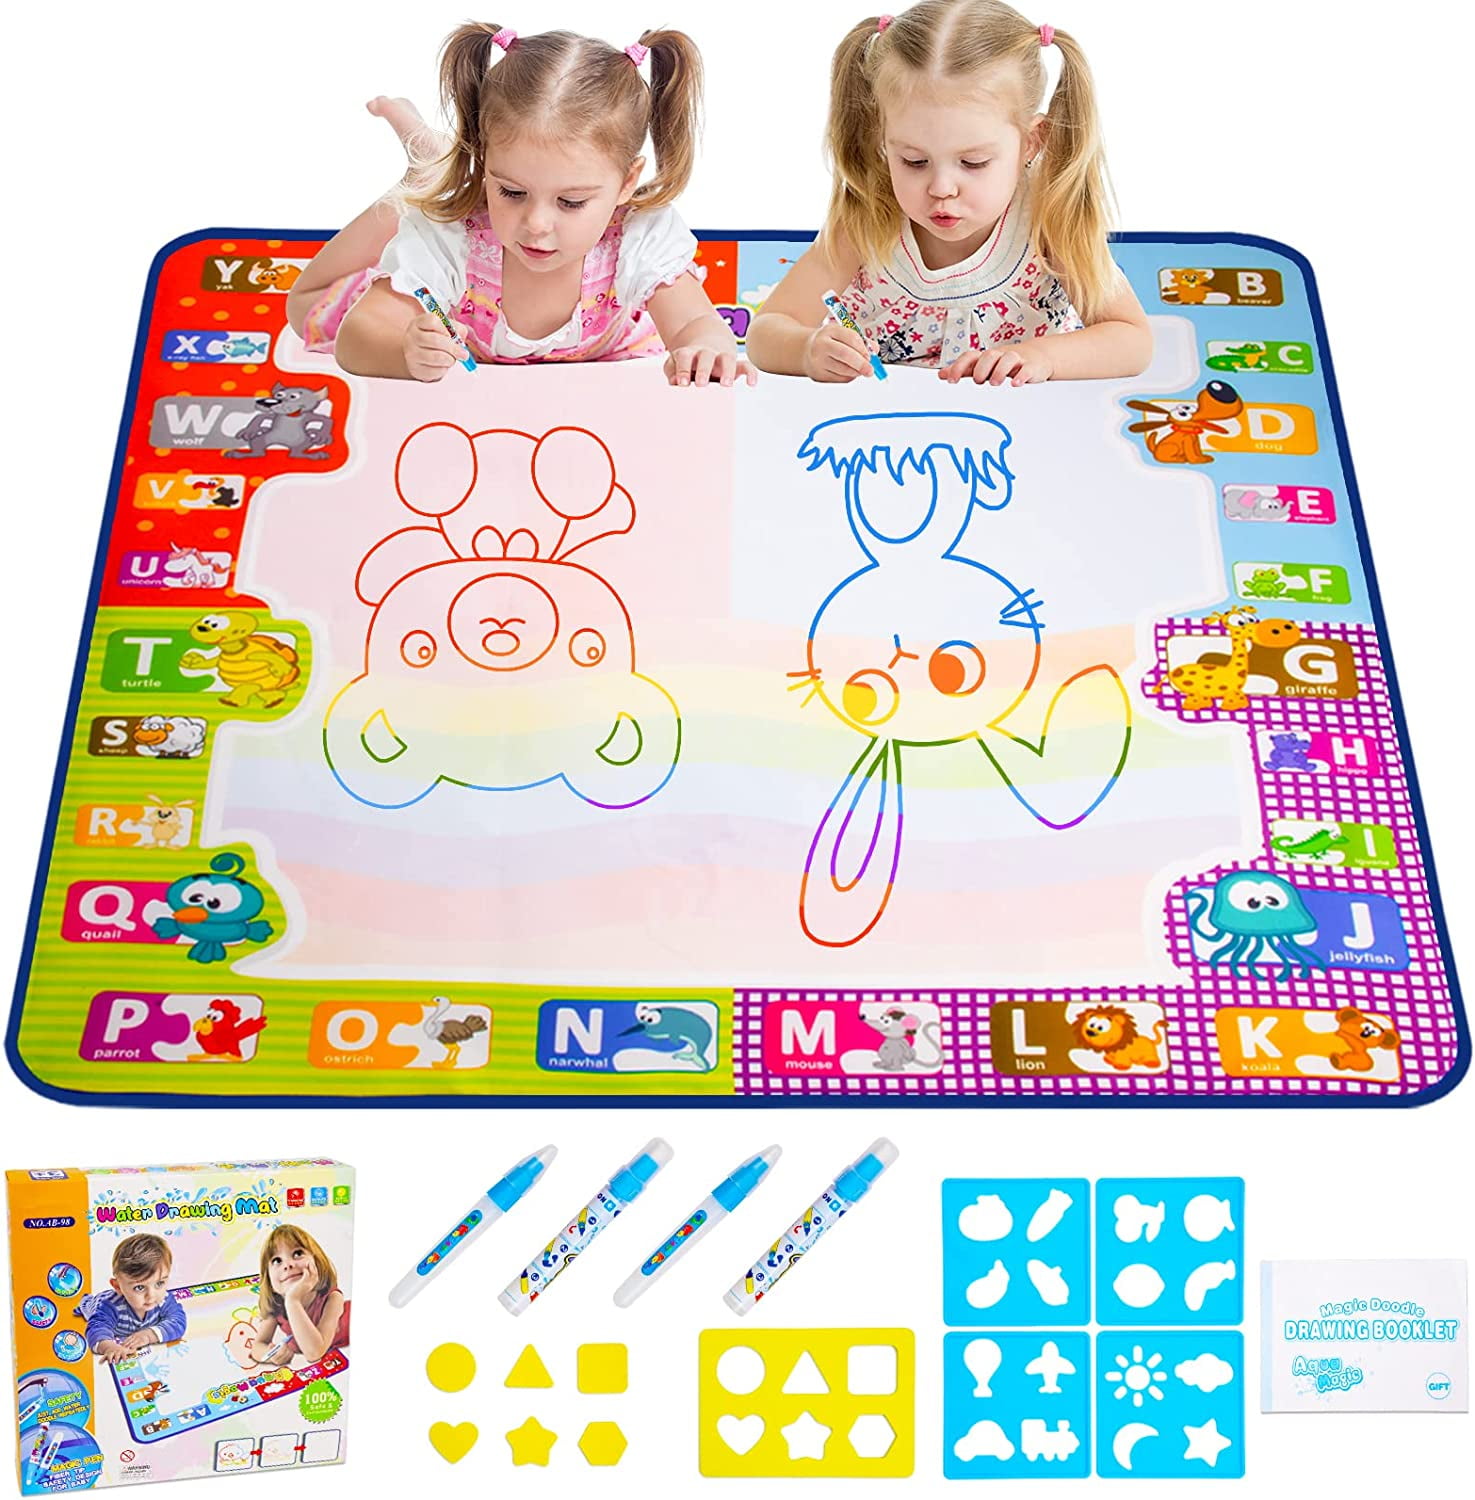 Tango Doodle Travel Doodle Mat 18.2X11.5inches drawing toys Magic Water Drawing Mats magic pen Educational toys for children toddlers kids 